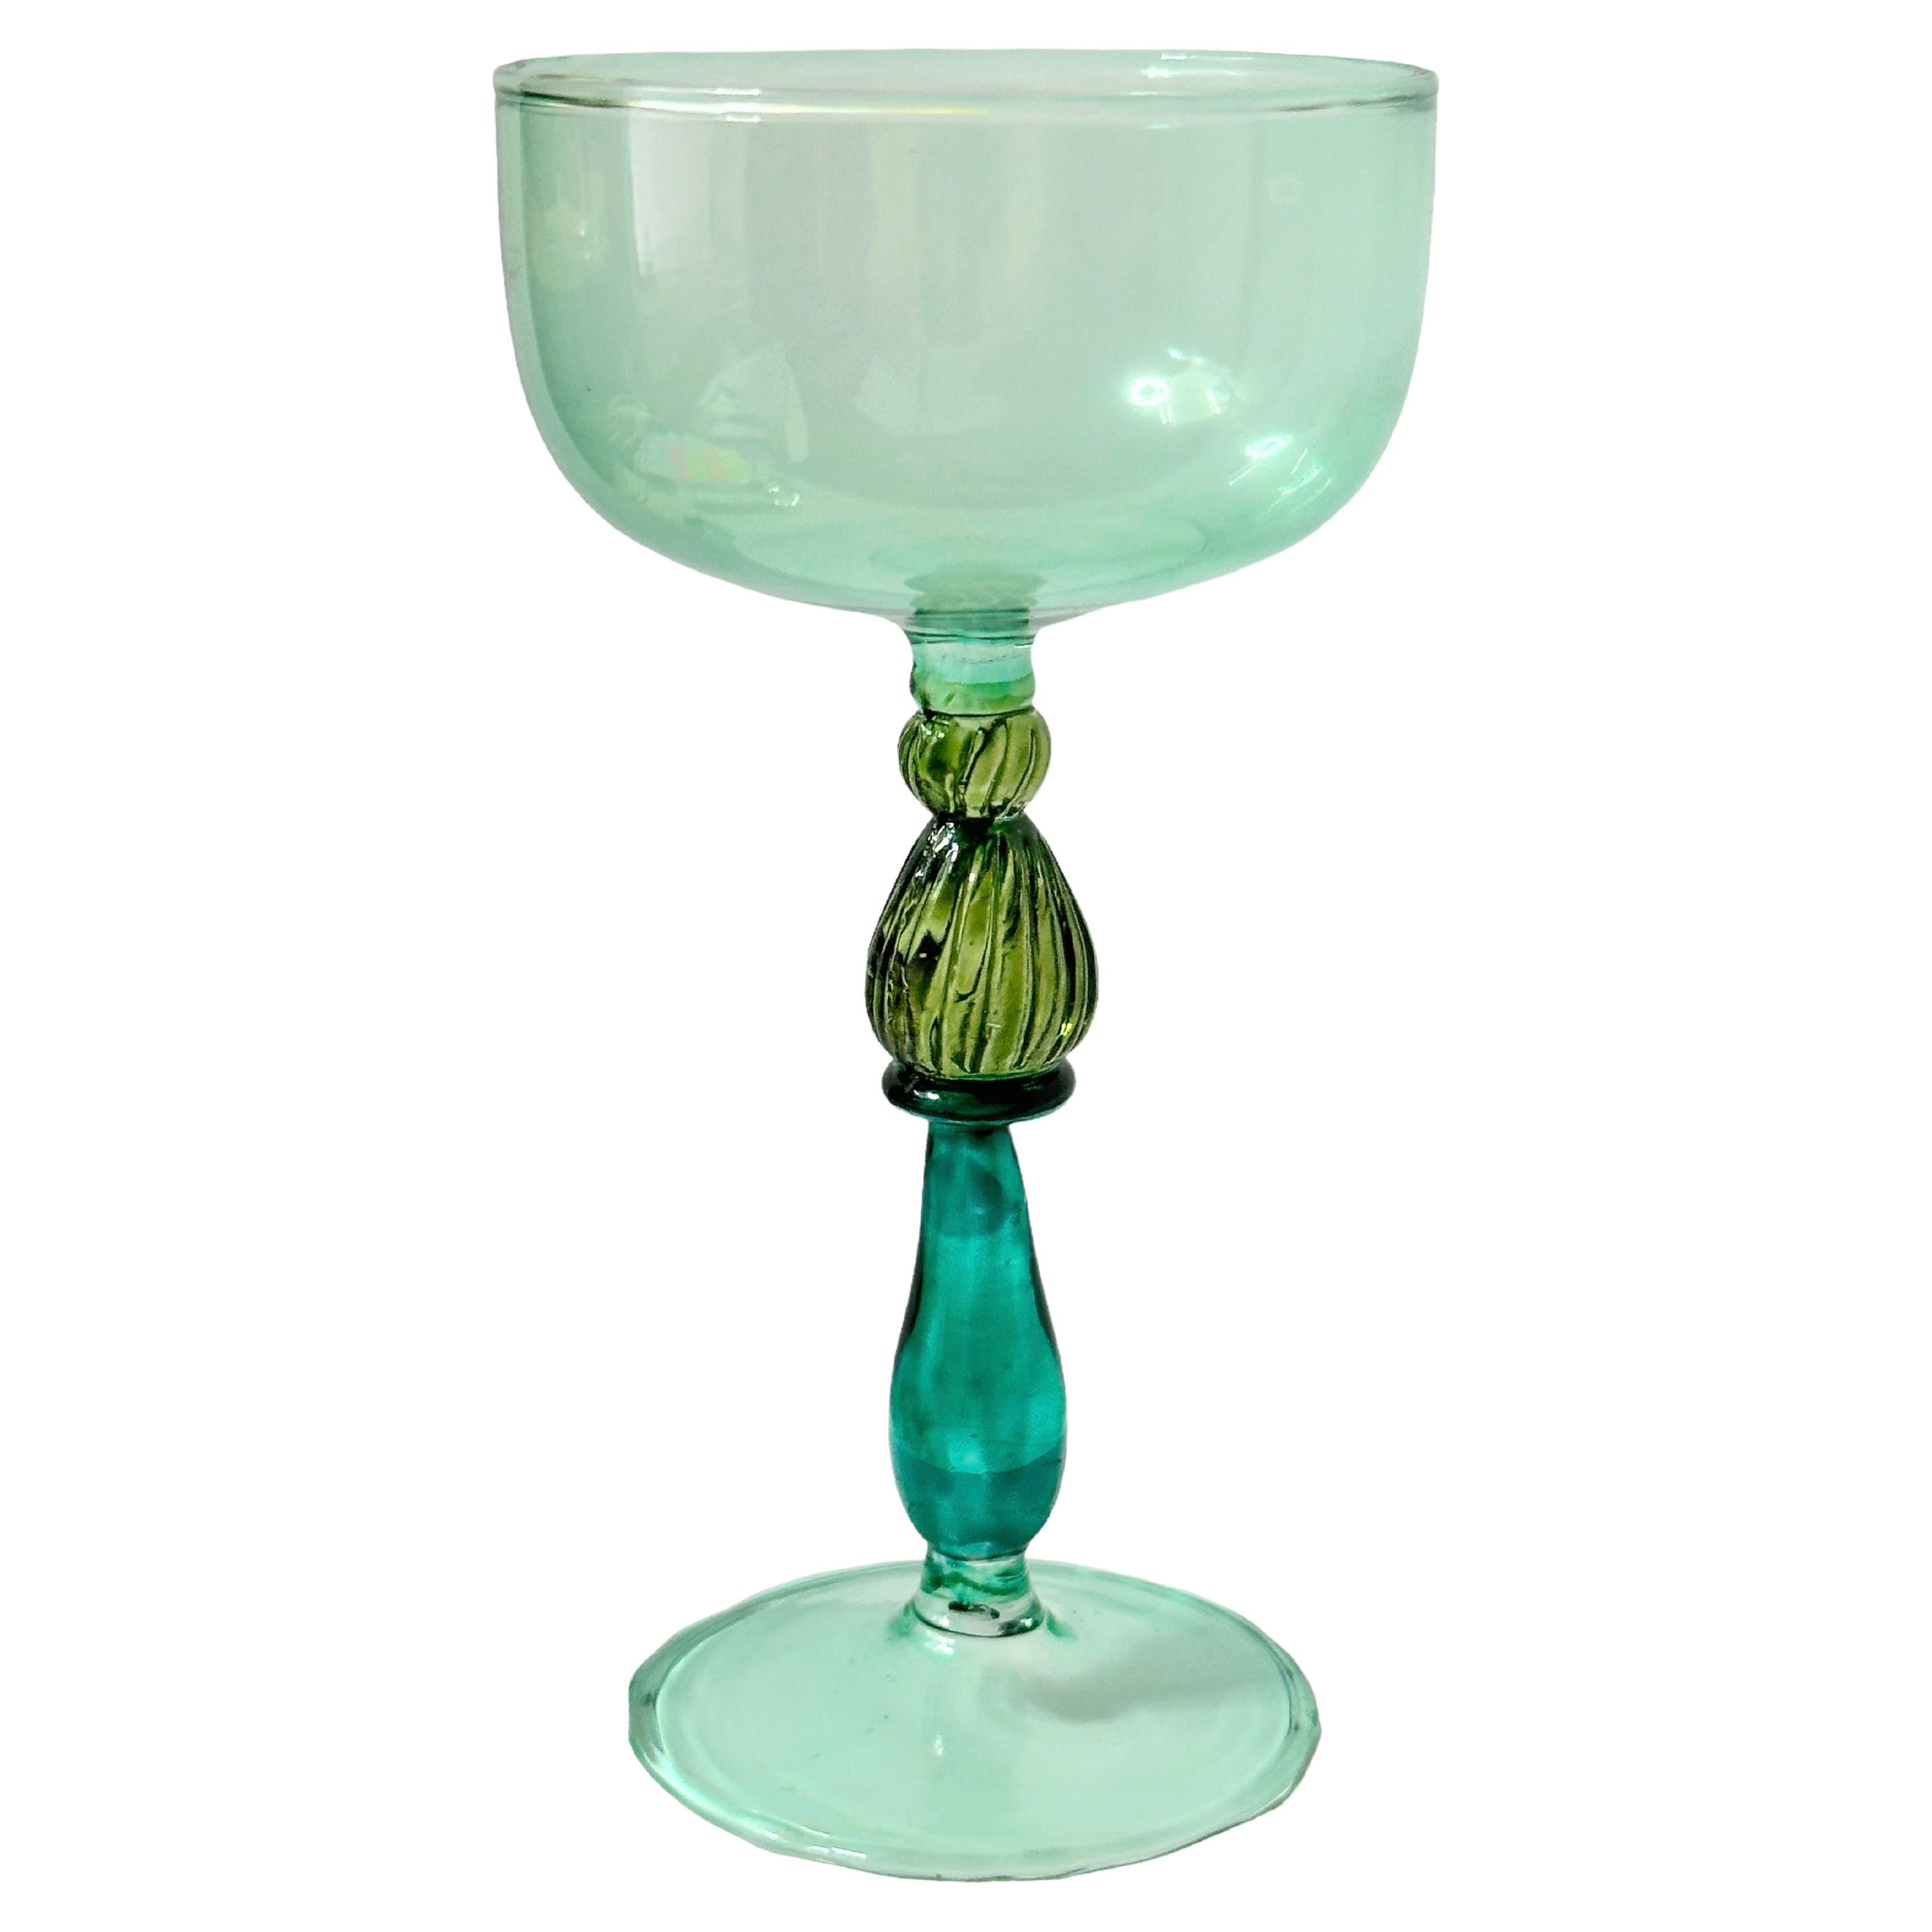 https://a.1stdibscdn.com/variations-of-green-salviati-murano-glass-liqueur-goblet-vintage-italy-for-sale/f_39981/f_366283821697363708316/f_36628382_1697363709626_bg_processed.jpg